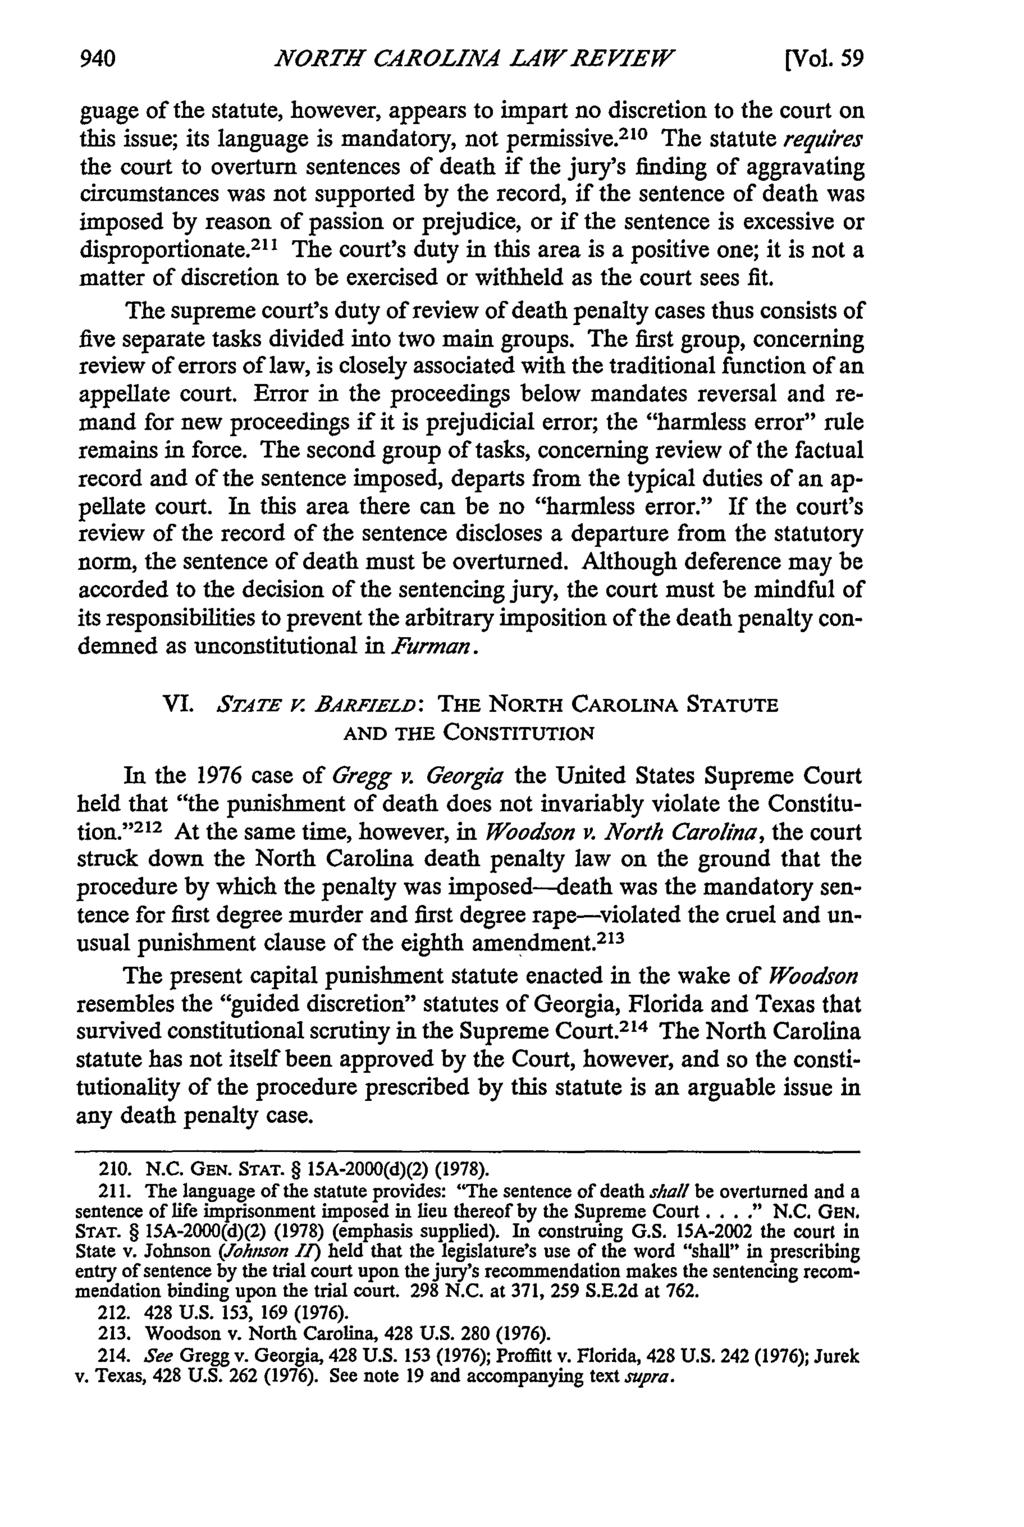 NORTH C4ROLINA LAW REVIEWV [Vol. 59 guage of the statute, however, appears to impart no discretion to the court on this issue; its language is mandatory, not permissive.